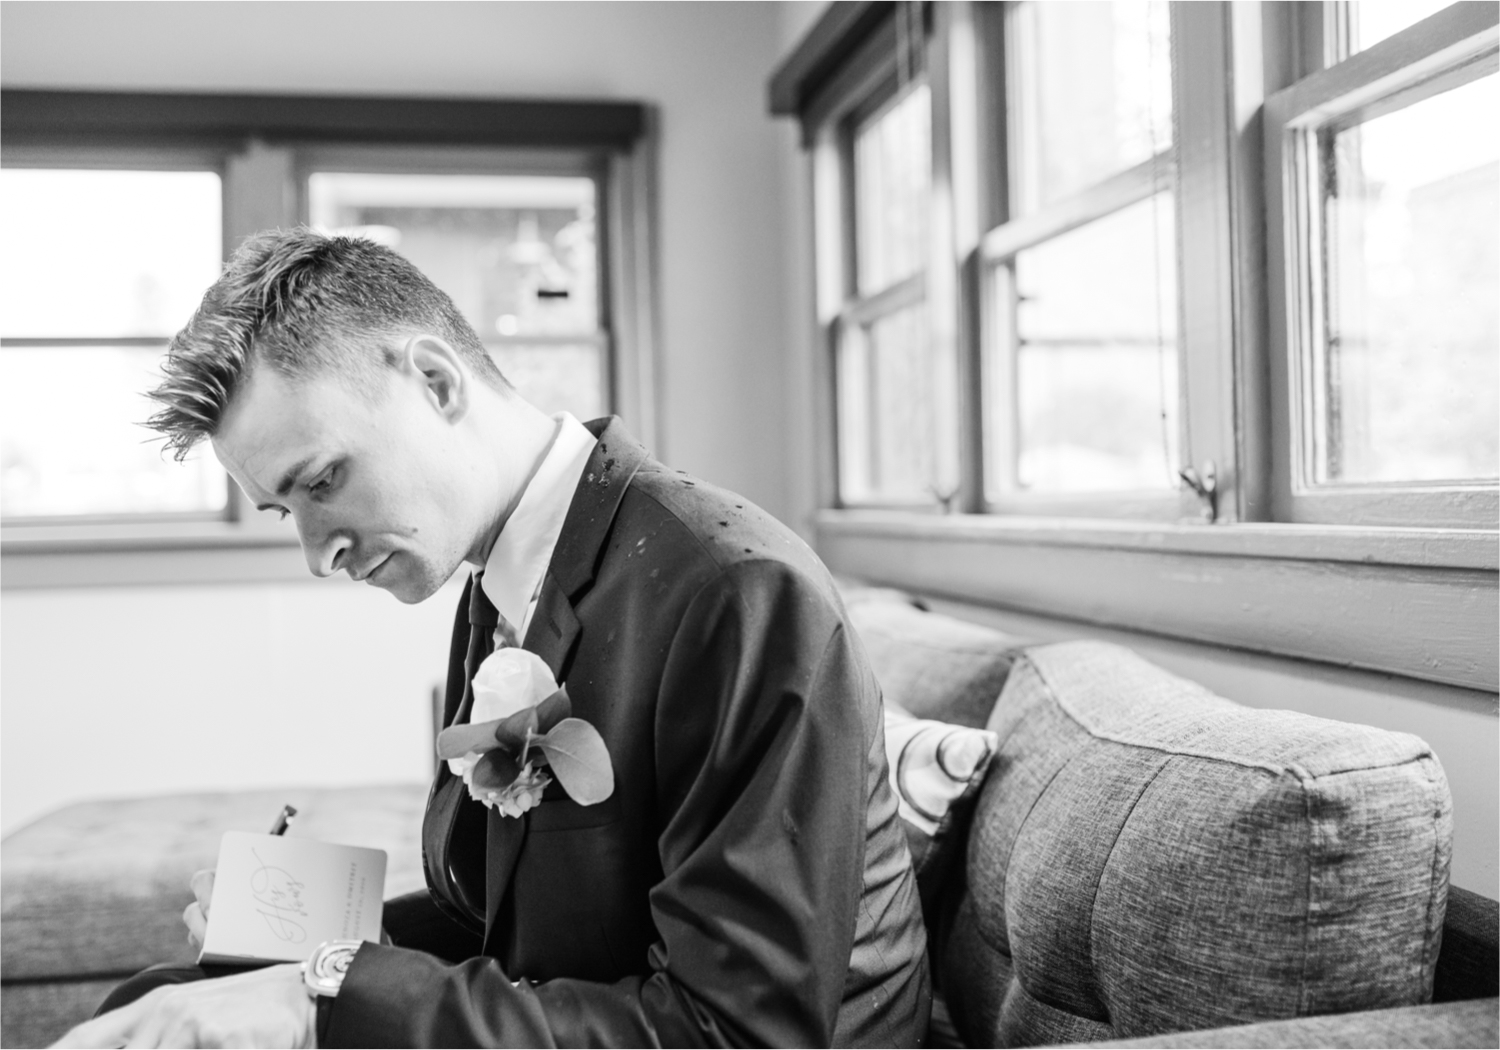 Romantic and Rustic Wedding at The Mill in Windsor | Britni Girard Photography | Colorado based wedding photography and videography team | Groom portraits | Royal Blue and White Wedding | Groomsmen attire from Express